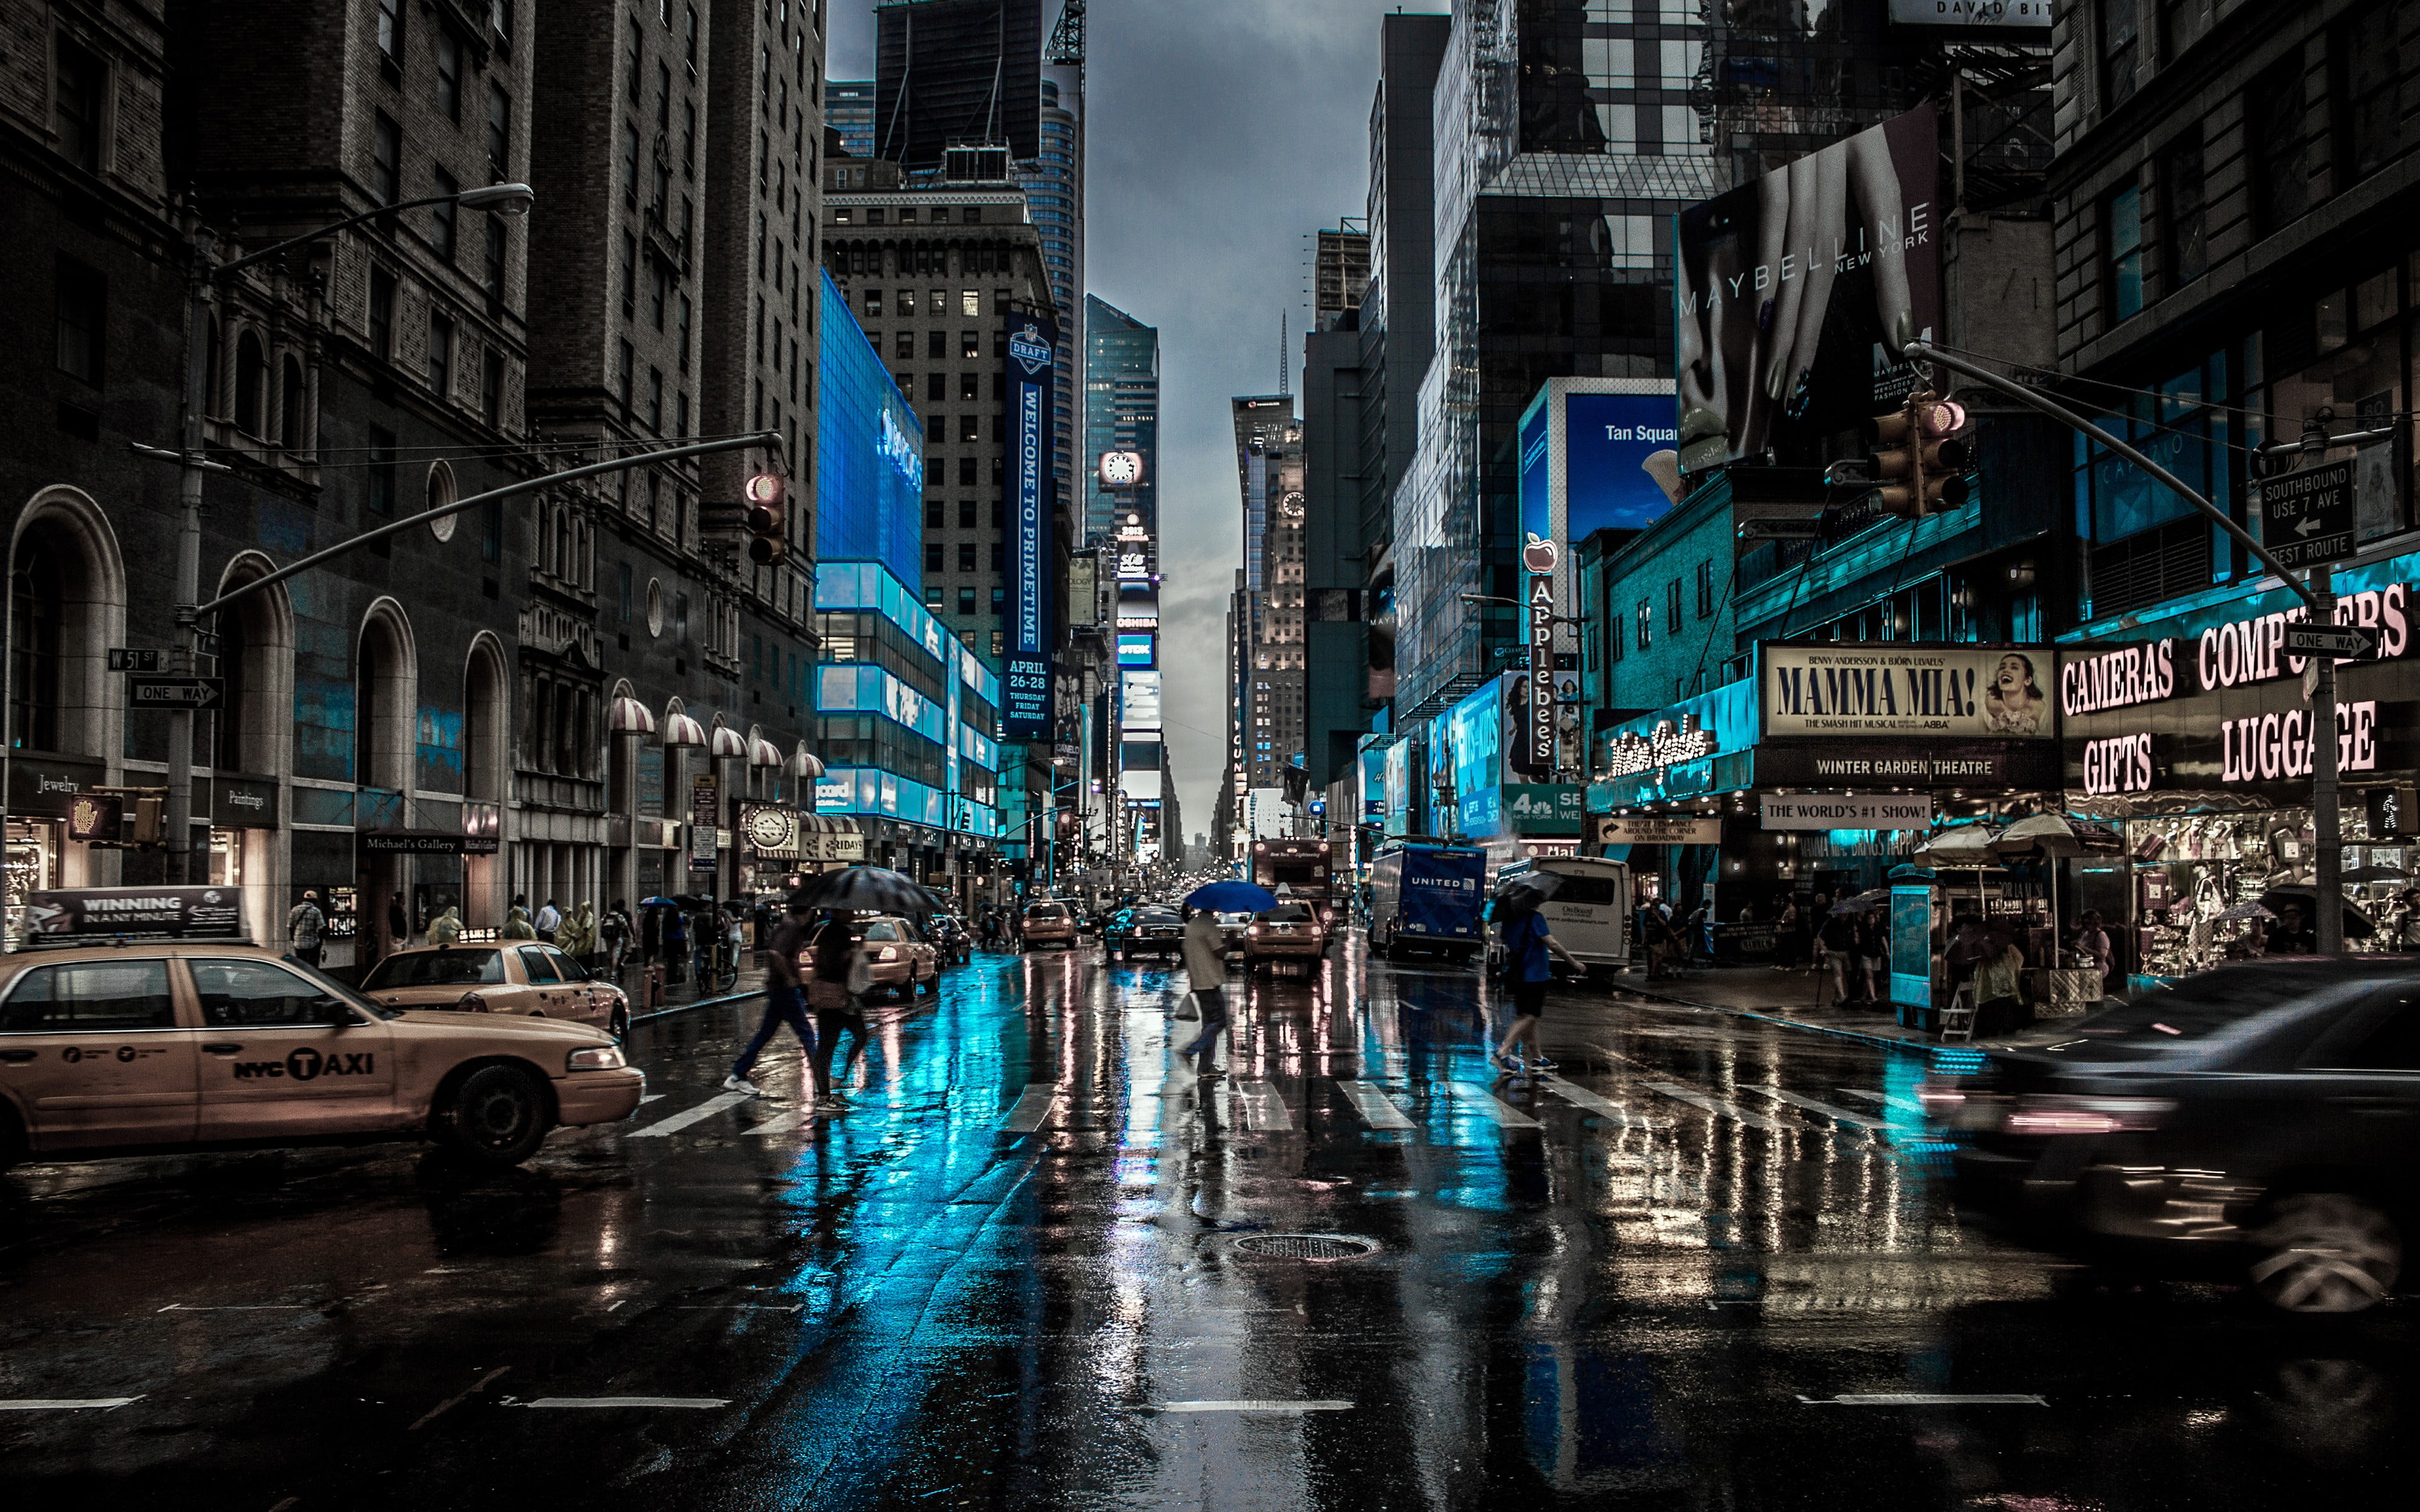 New York city 3D wallpaper, high rise buildings and busy street